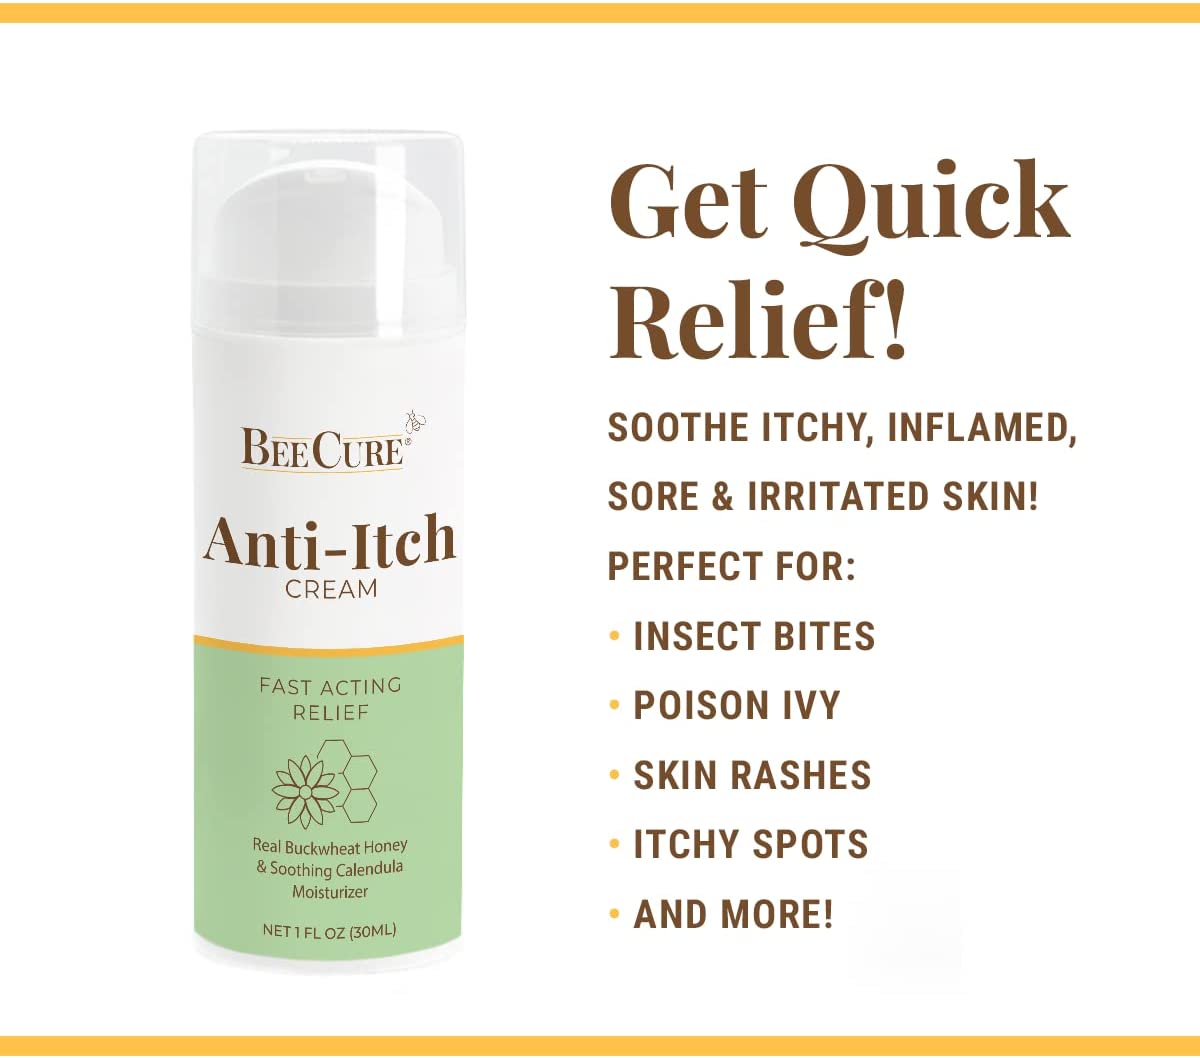 Some of the many benefits offered by BeeCure Anti-Itch Lotion!